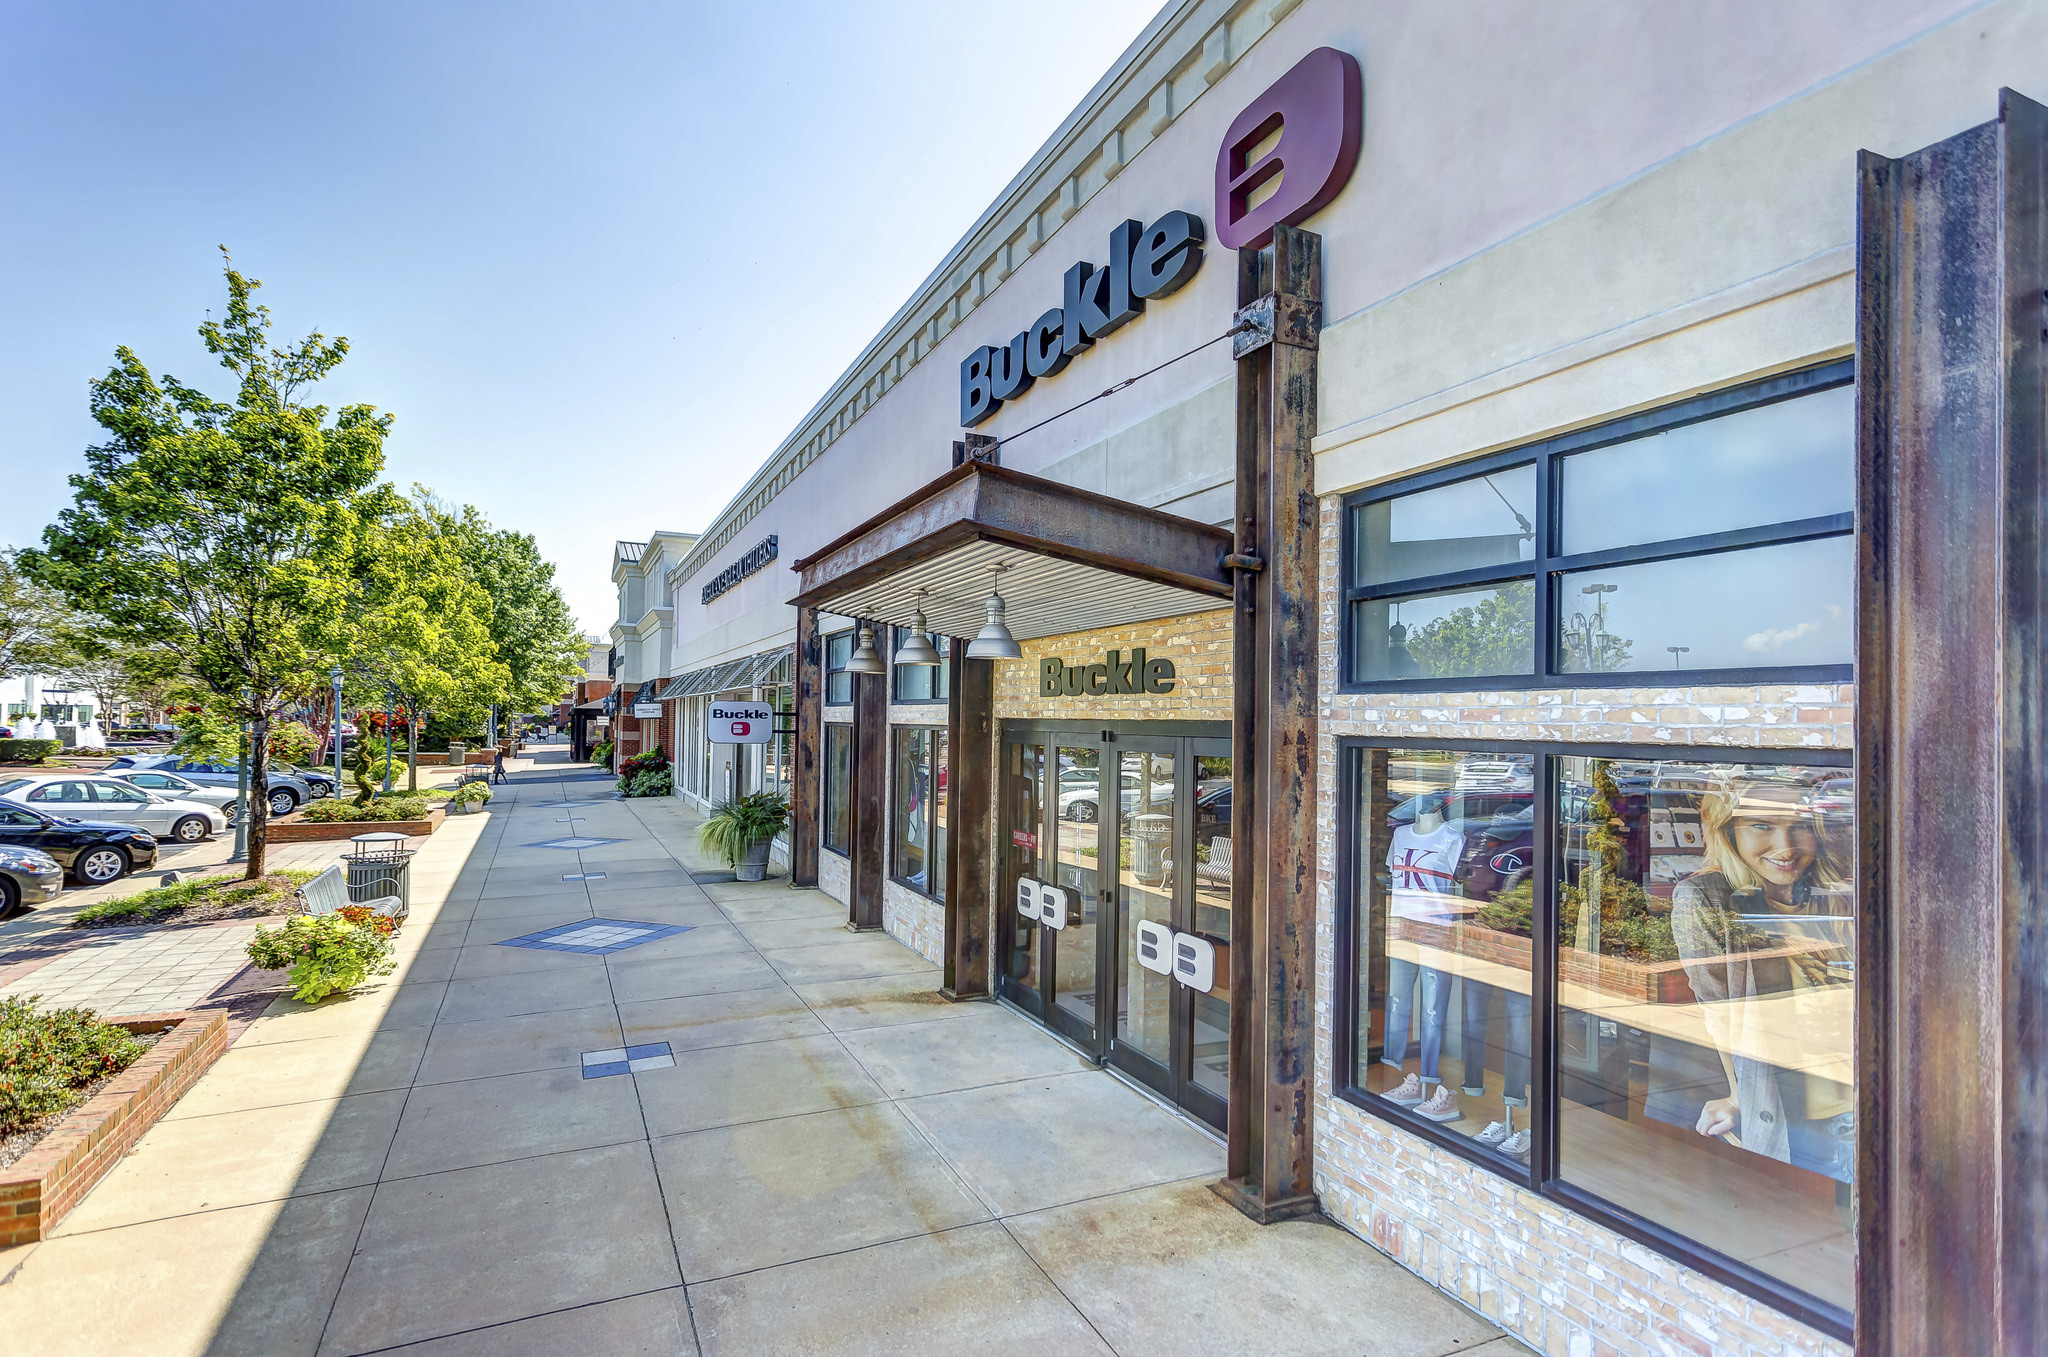 On the Go – The Shoppes at EastChase